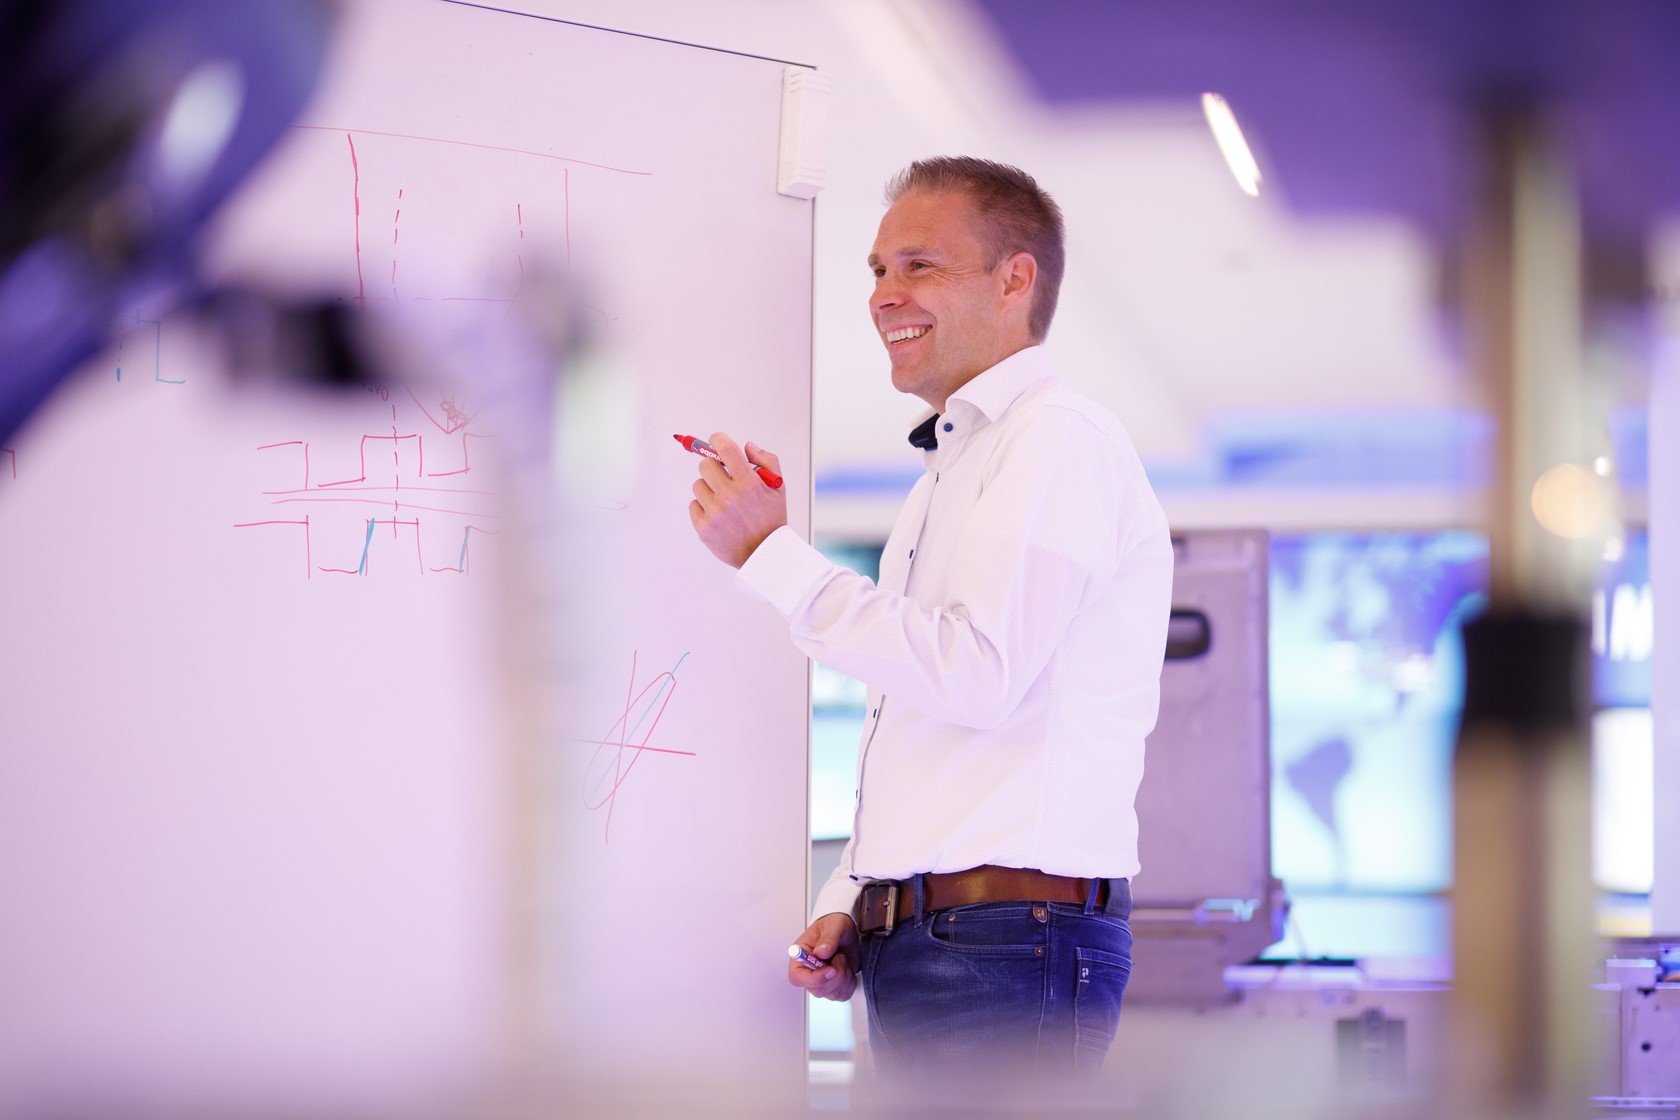 ASML Fellow Simon Mathijssen in a classroom points to a whiteboard which has drawings on it.